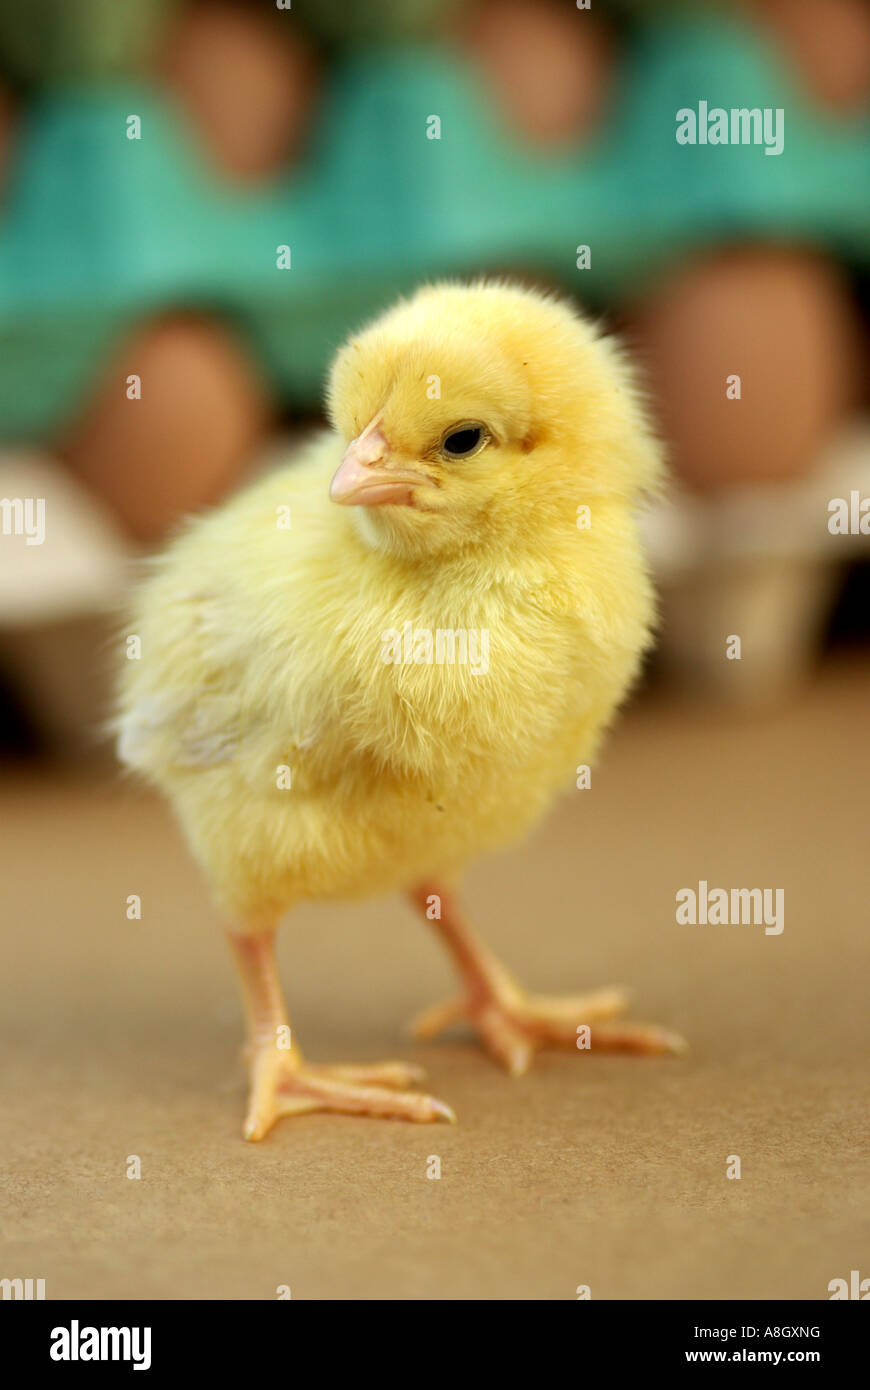 Day old chick, Gallus domesticus. Stock Photo